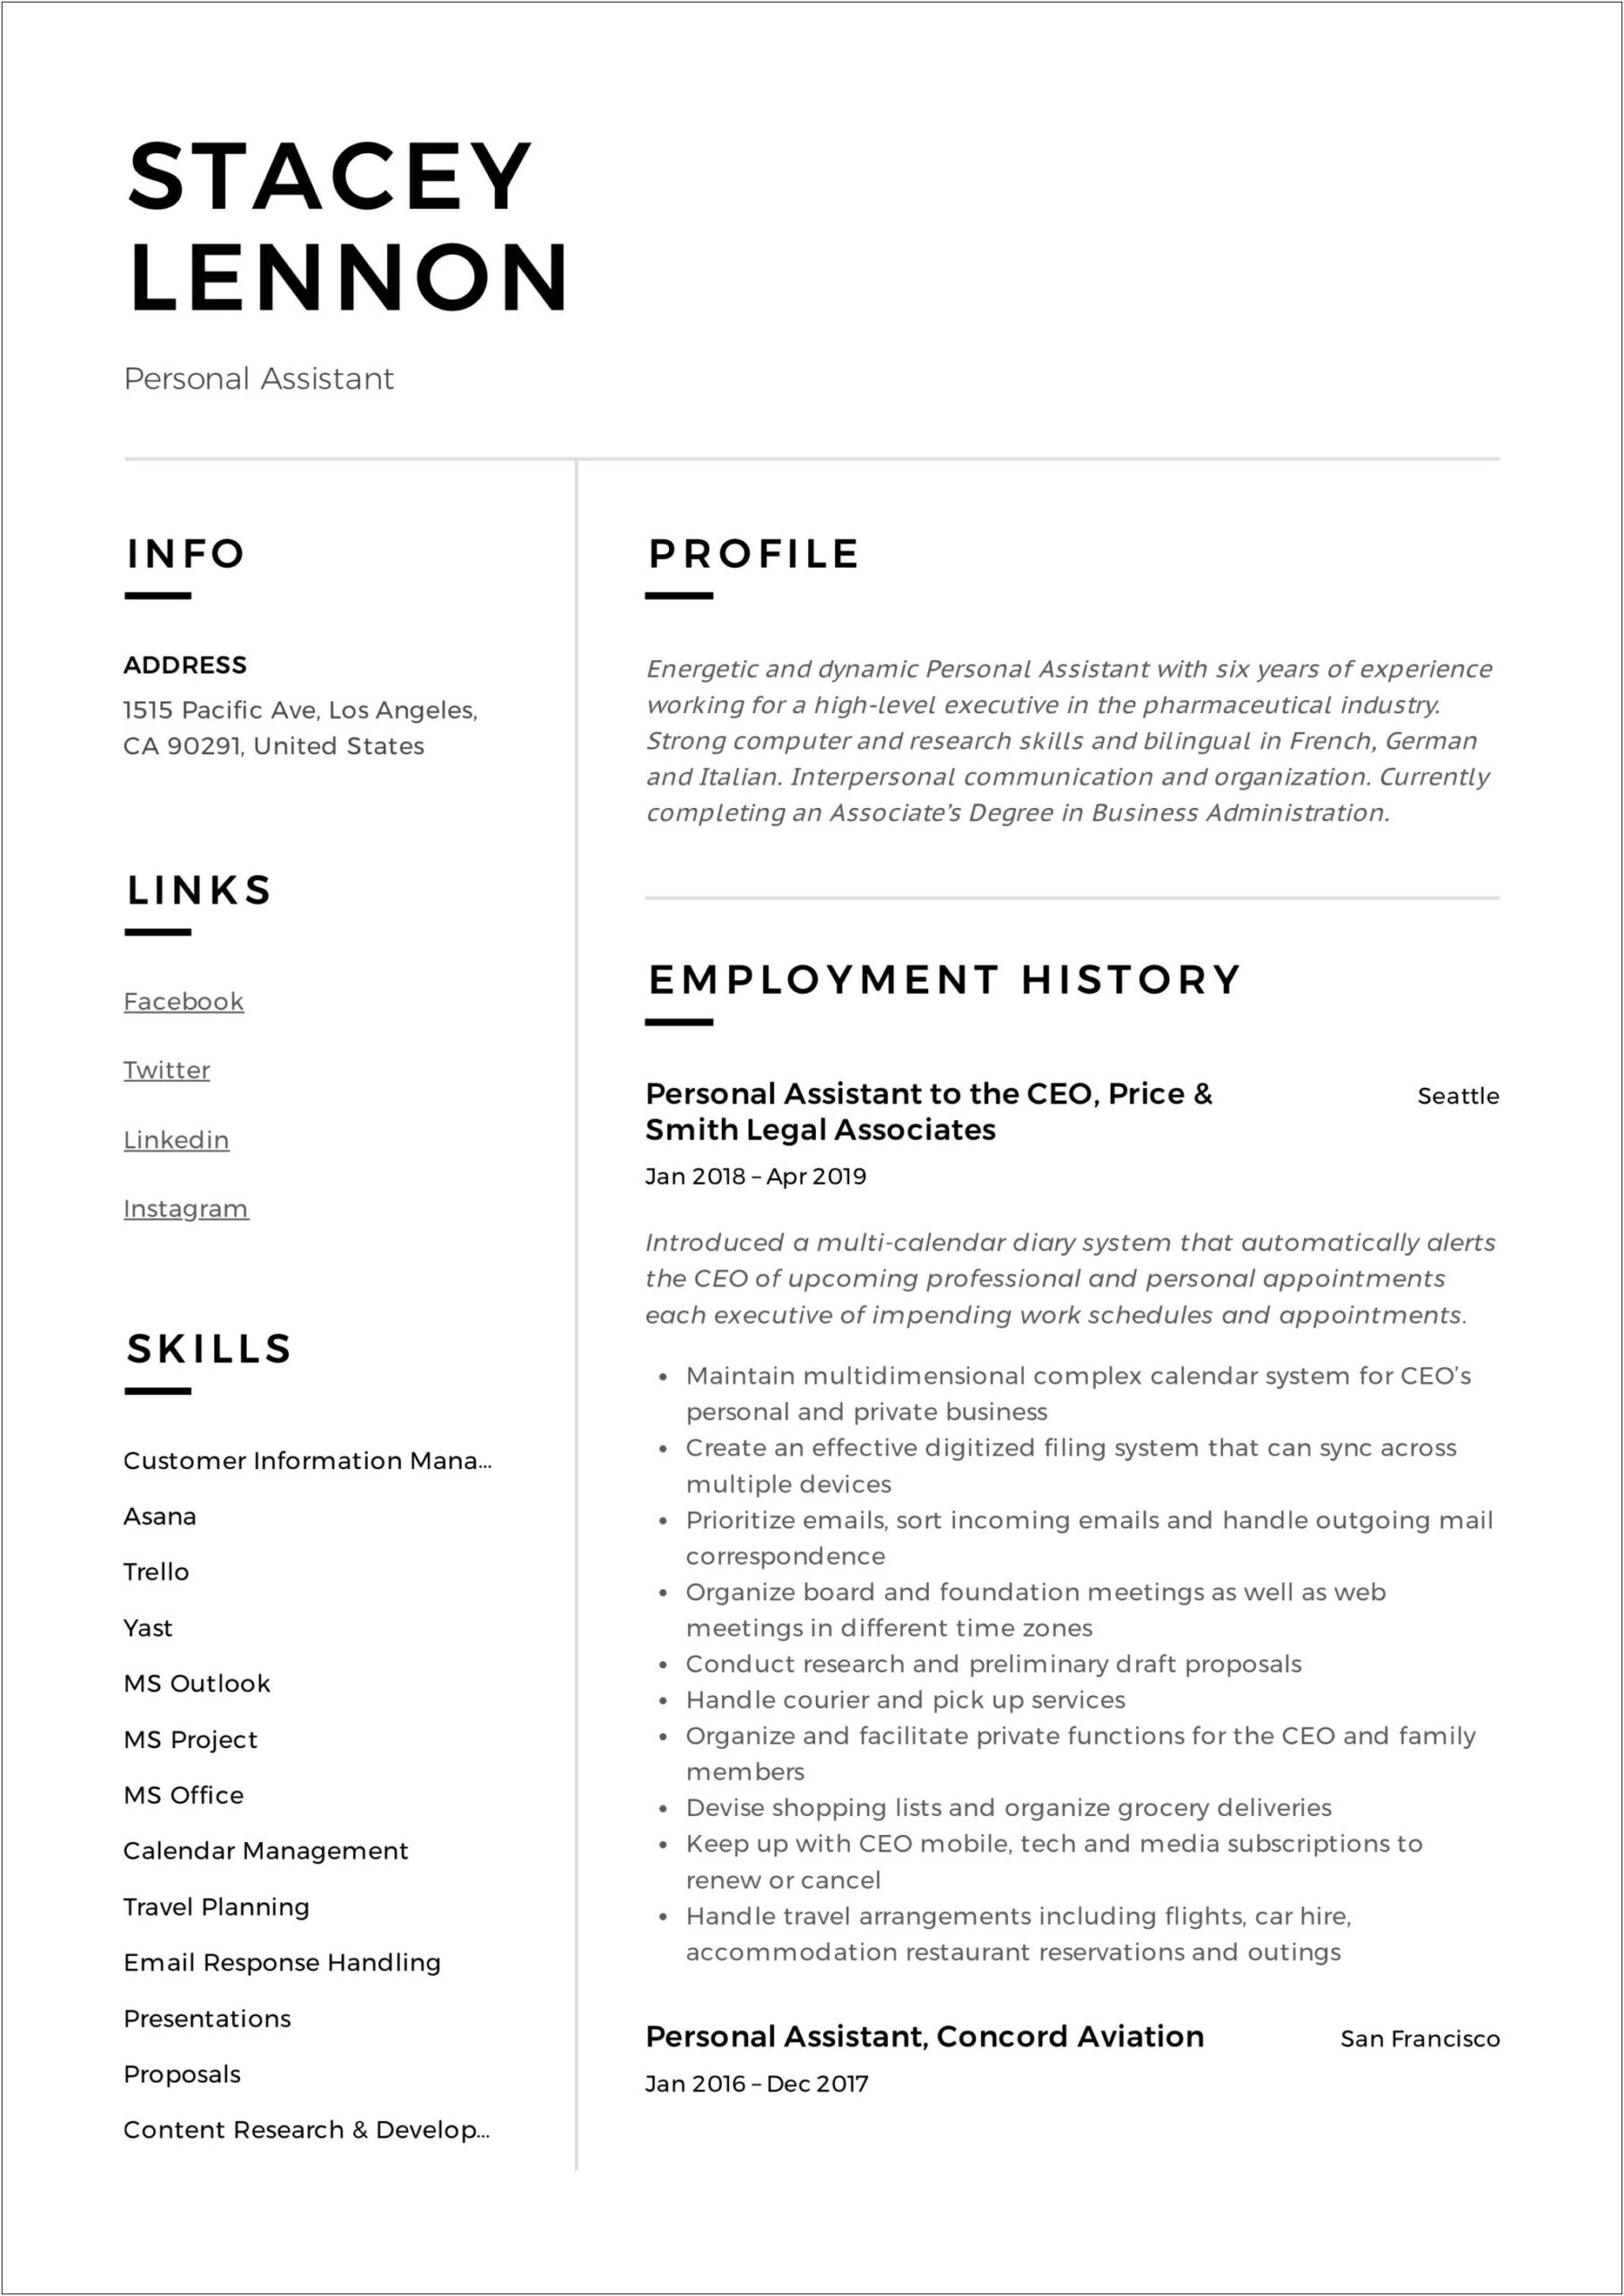 Resume To Get Personal Assistant Job